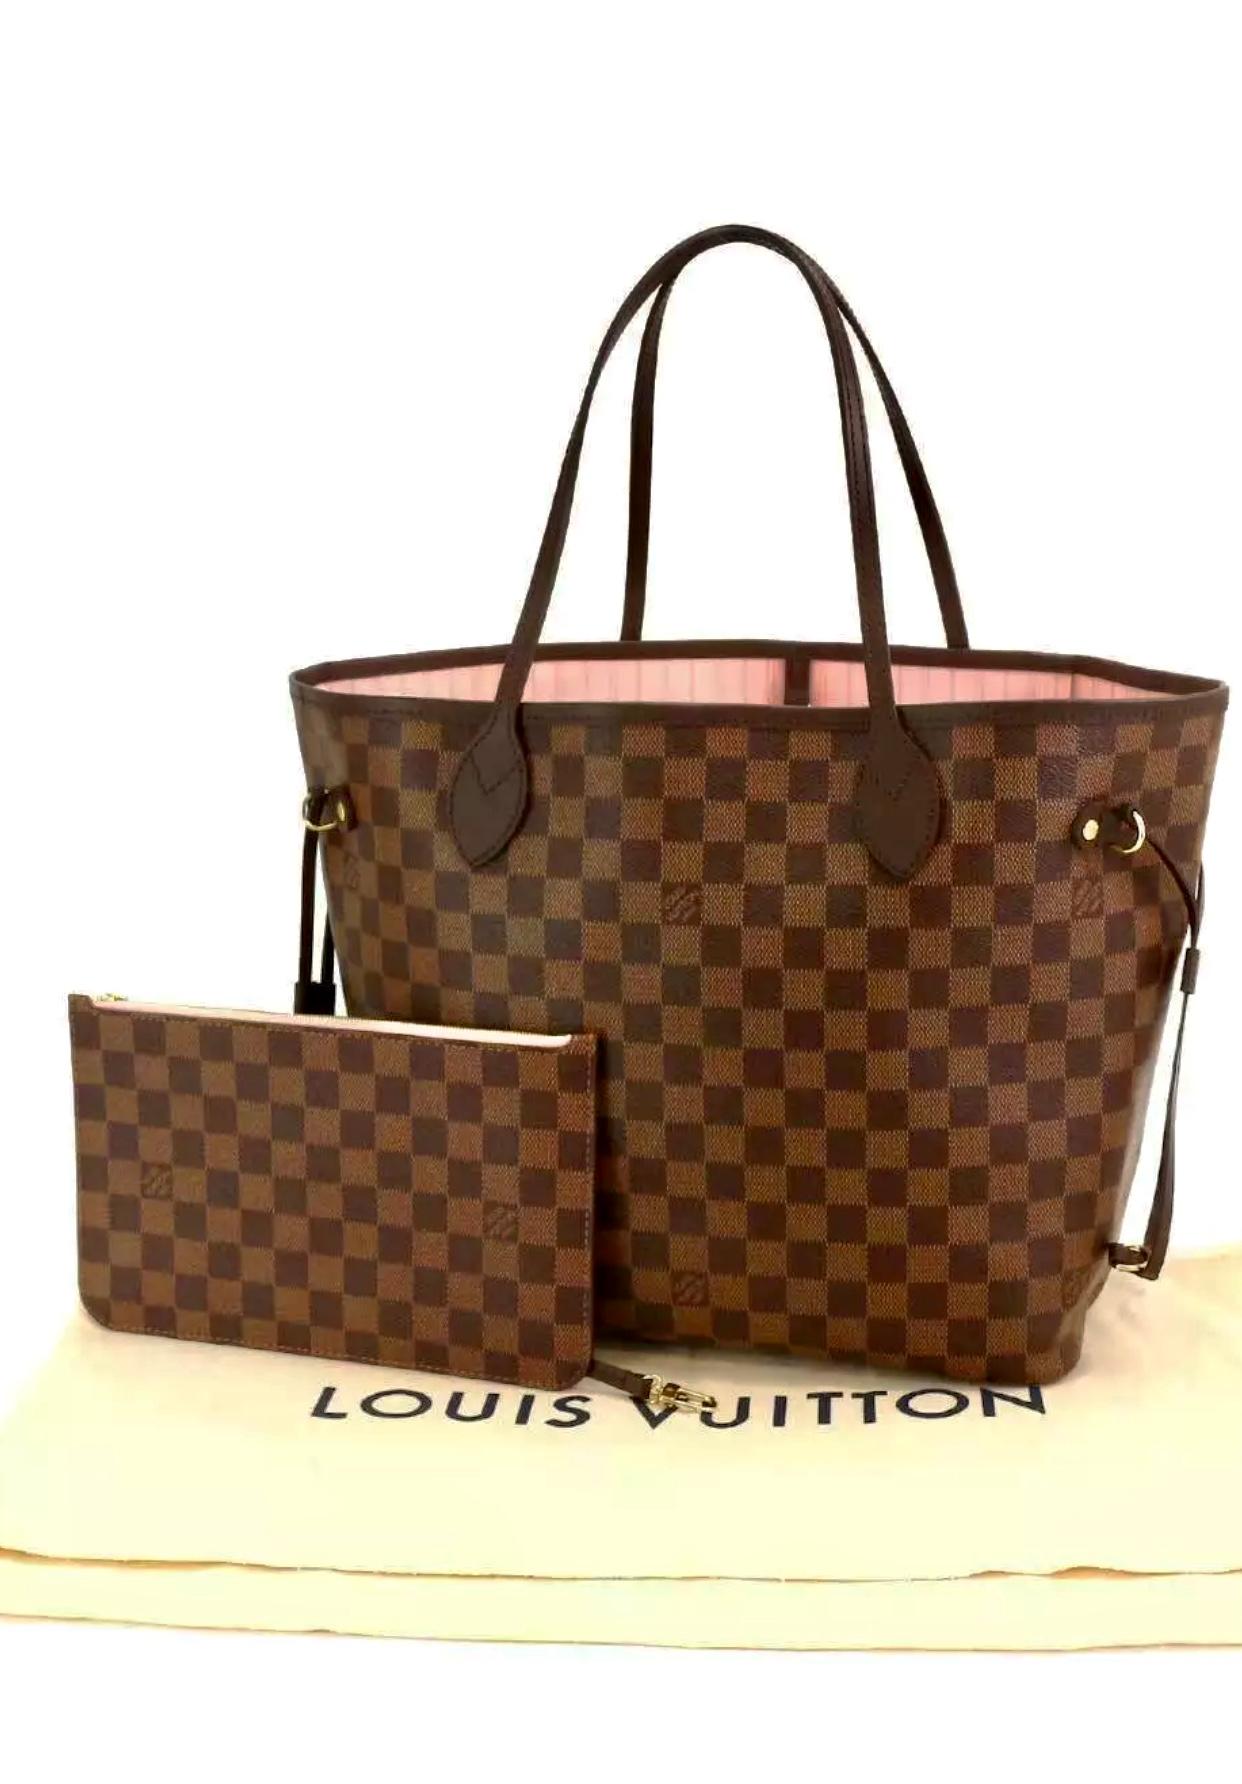 Louis Vuitton Neverfull MM Damier Ebene This is the Louis Vuitton Neverfull MM with the Damier Ebene canvas and Rose Ballerine interior The bag is almost new and has no damage The bag also comes with the pouch and pouch strap and comes with original